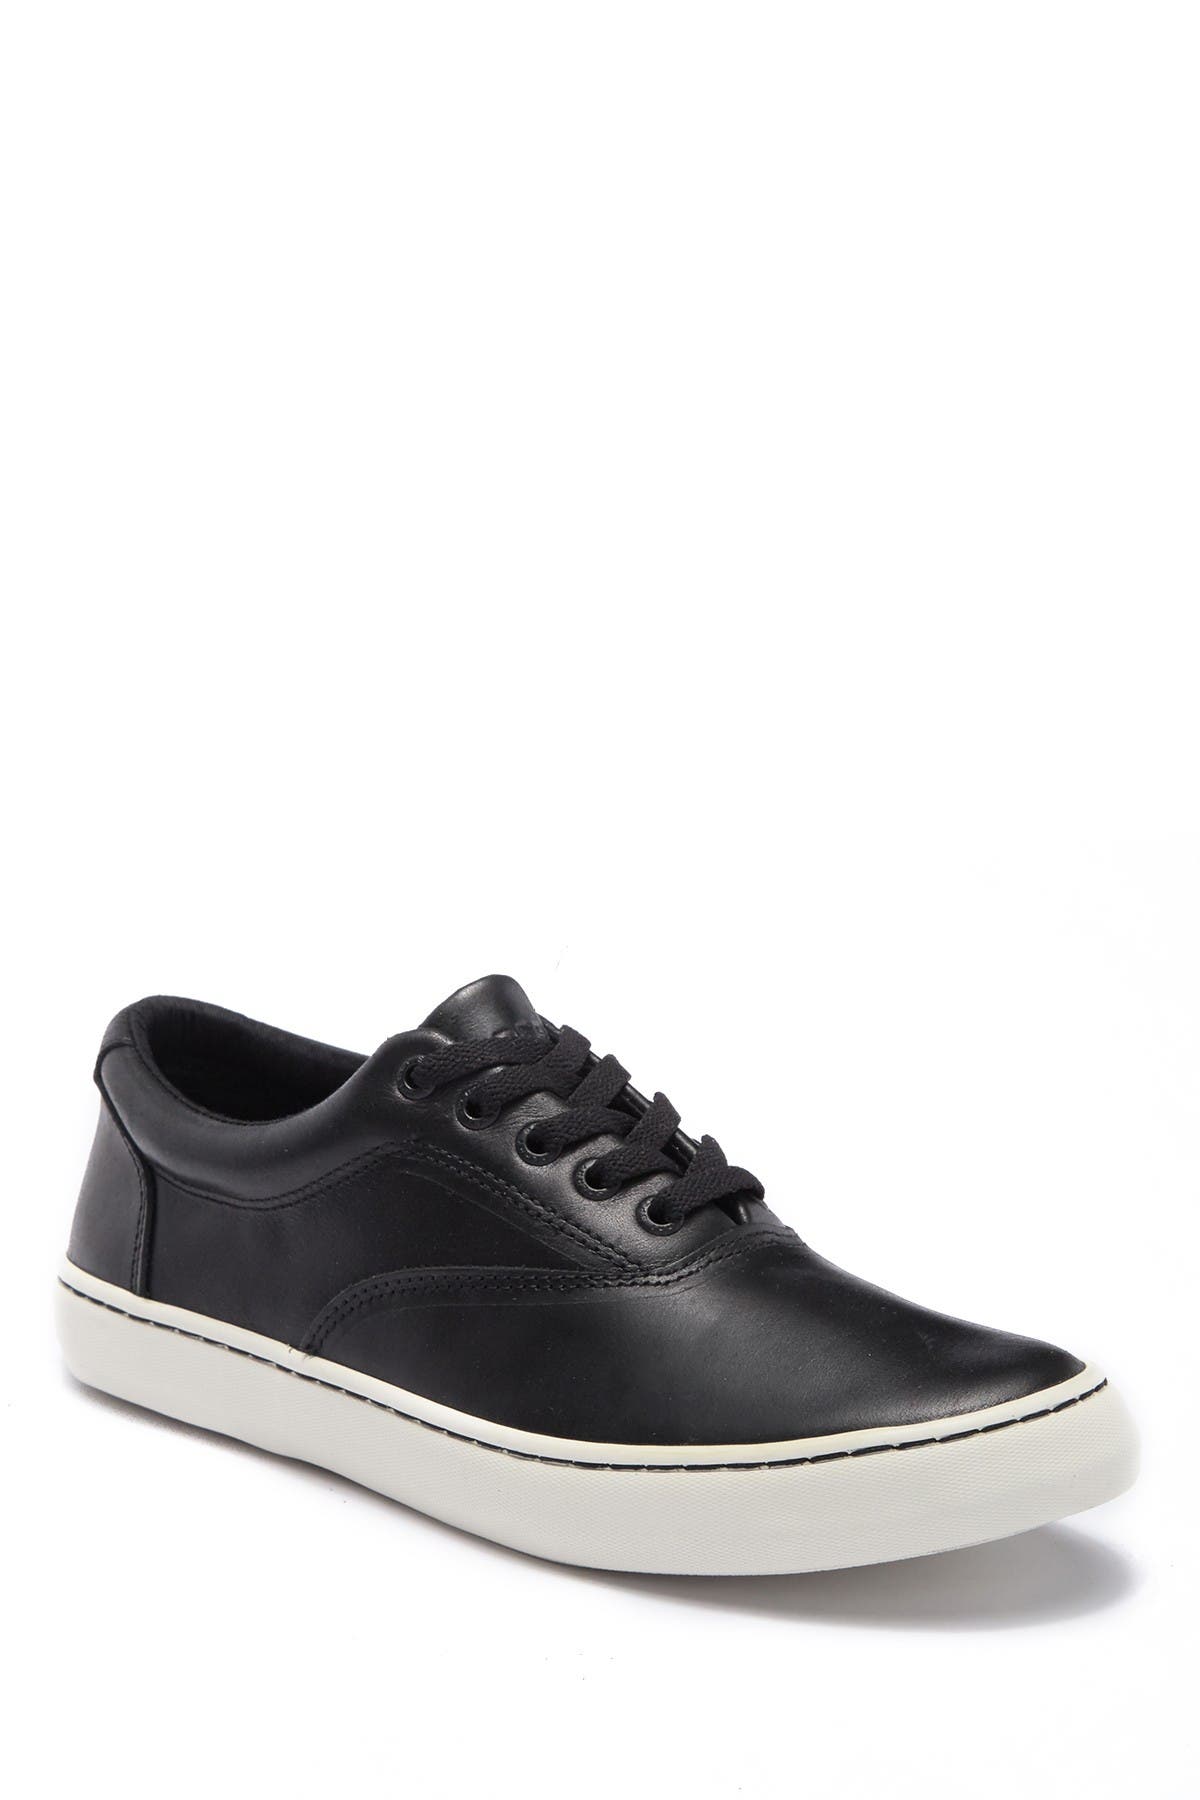 Sperry | Cutter CVO Leather Sneaker 